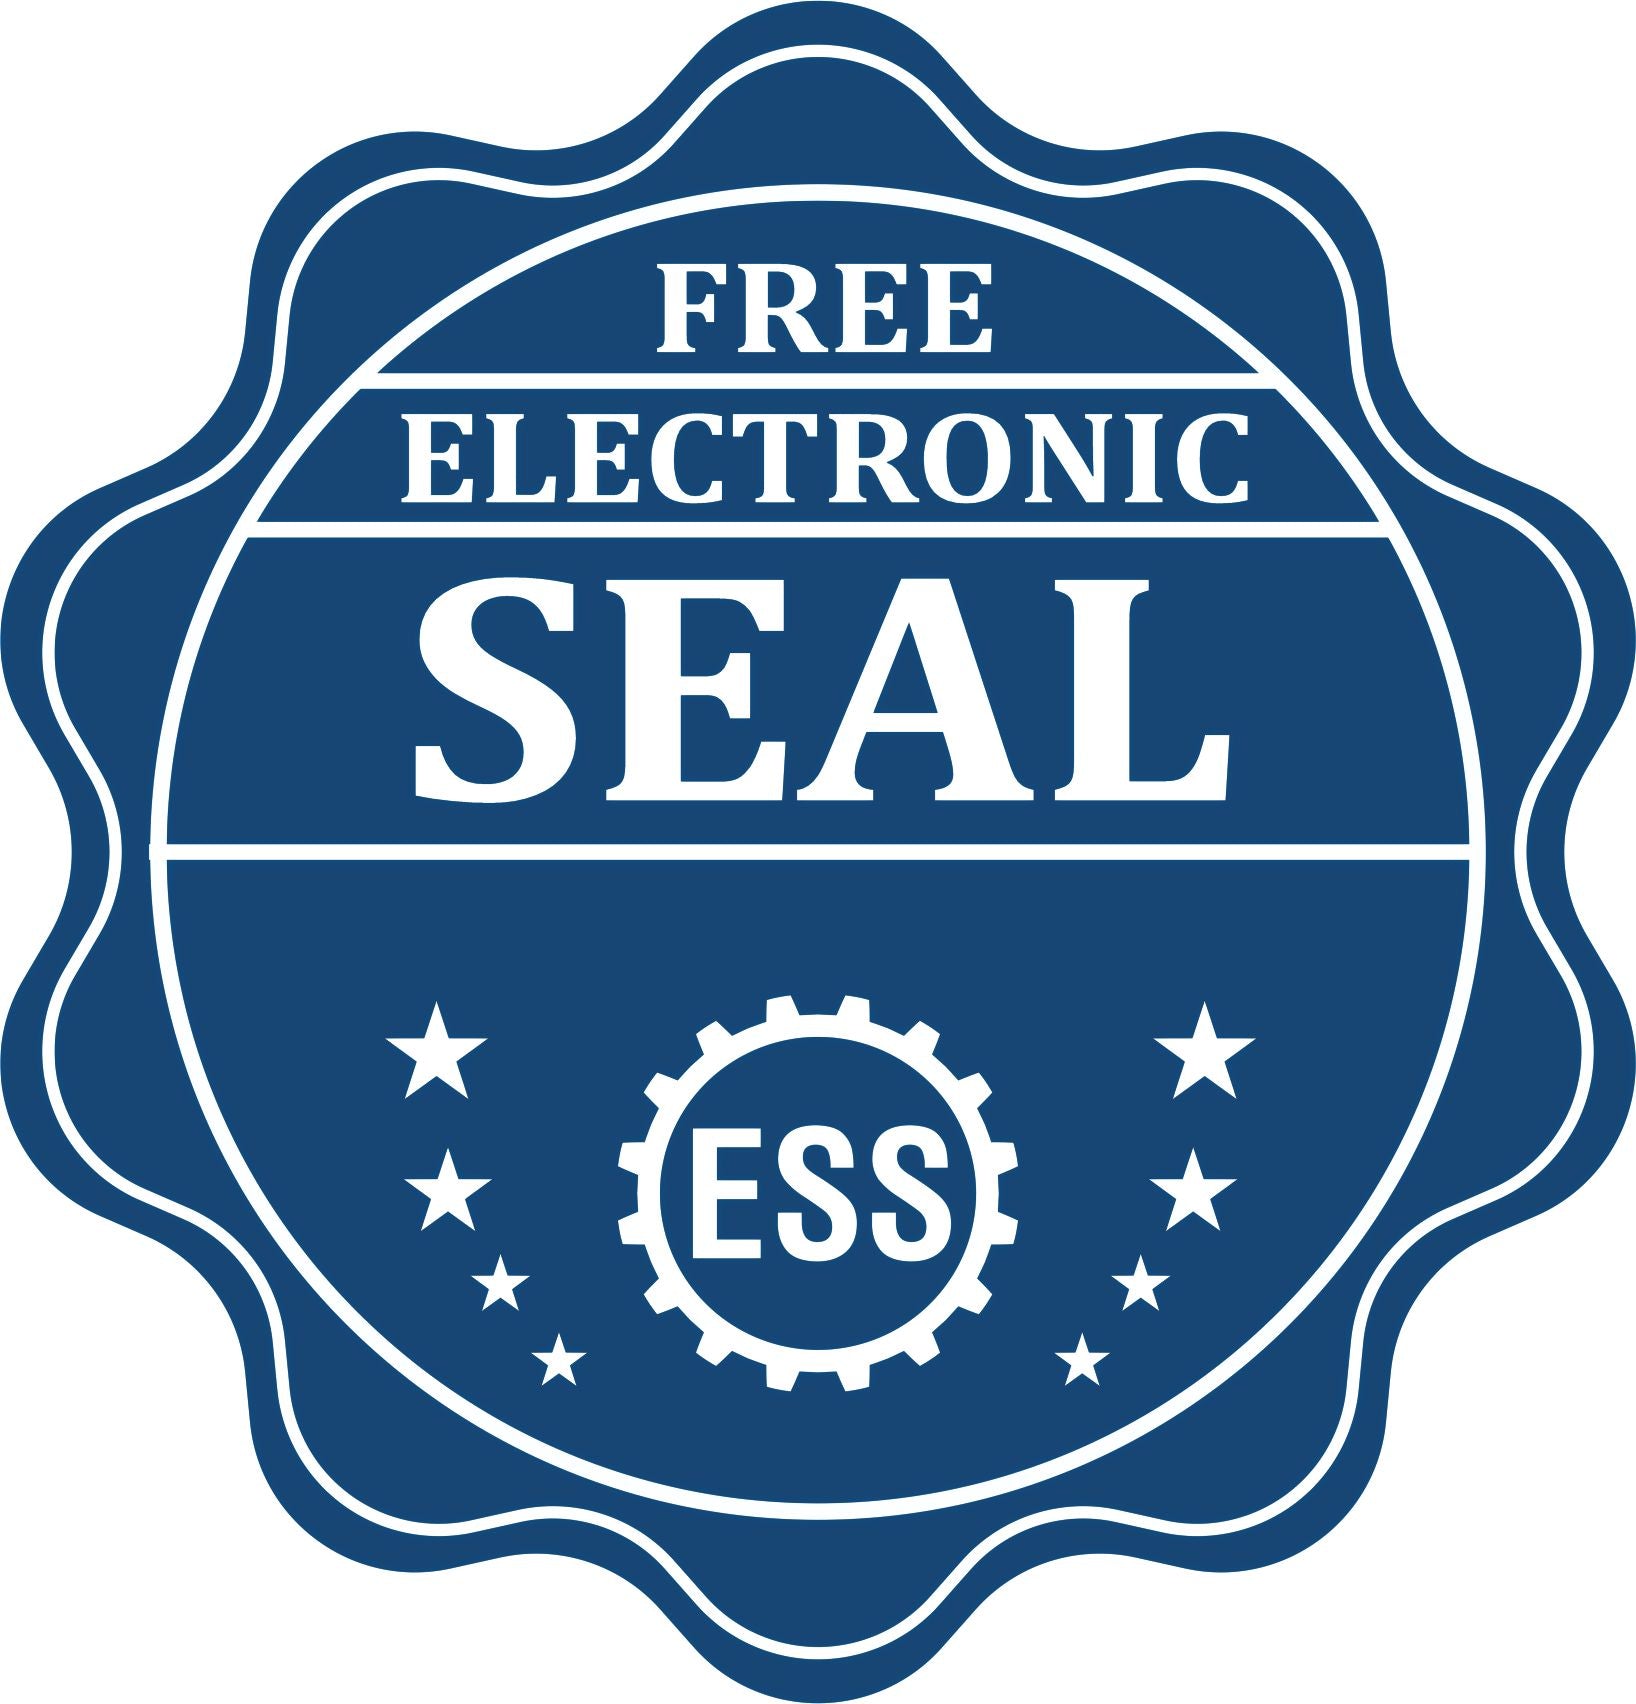 A badge showing a free electronic seal for the Super Slim New York Notary Public Stamp with stars and the ESS gear on the emblem.